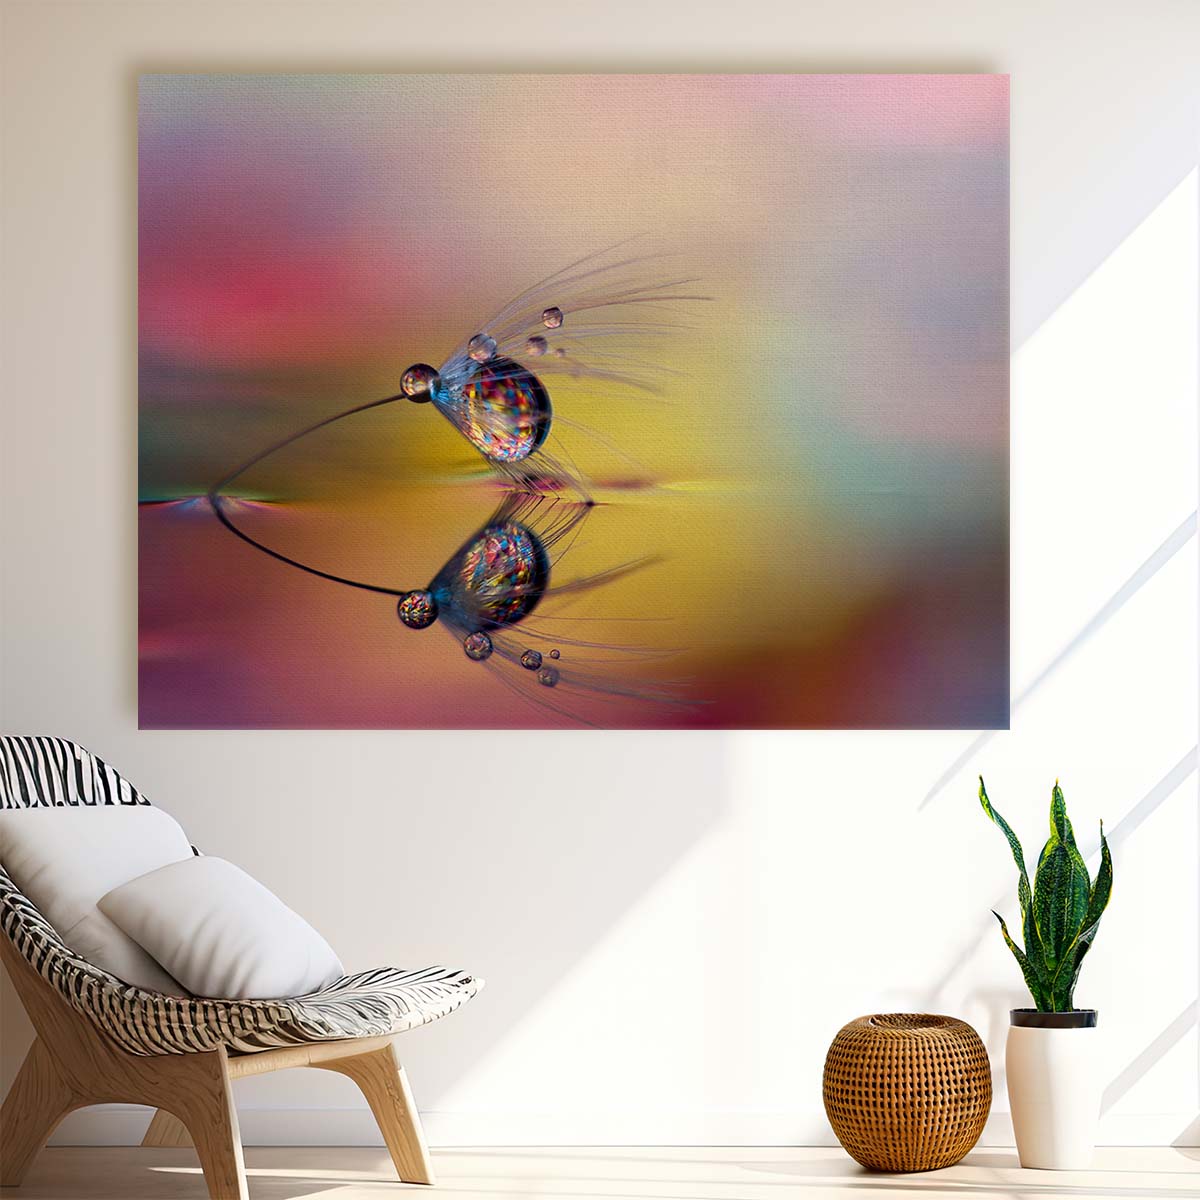 Pastel Water Droplets & Soft Reflections Wall Art by Luxuriance Designs. Made in USA.